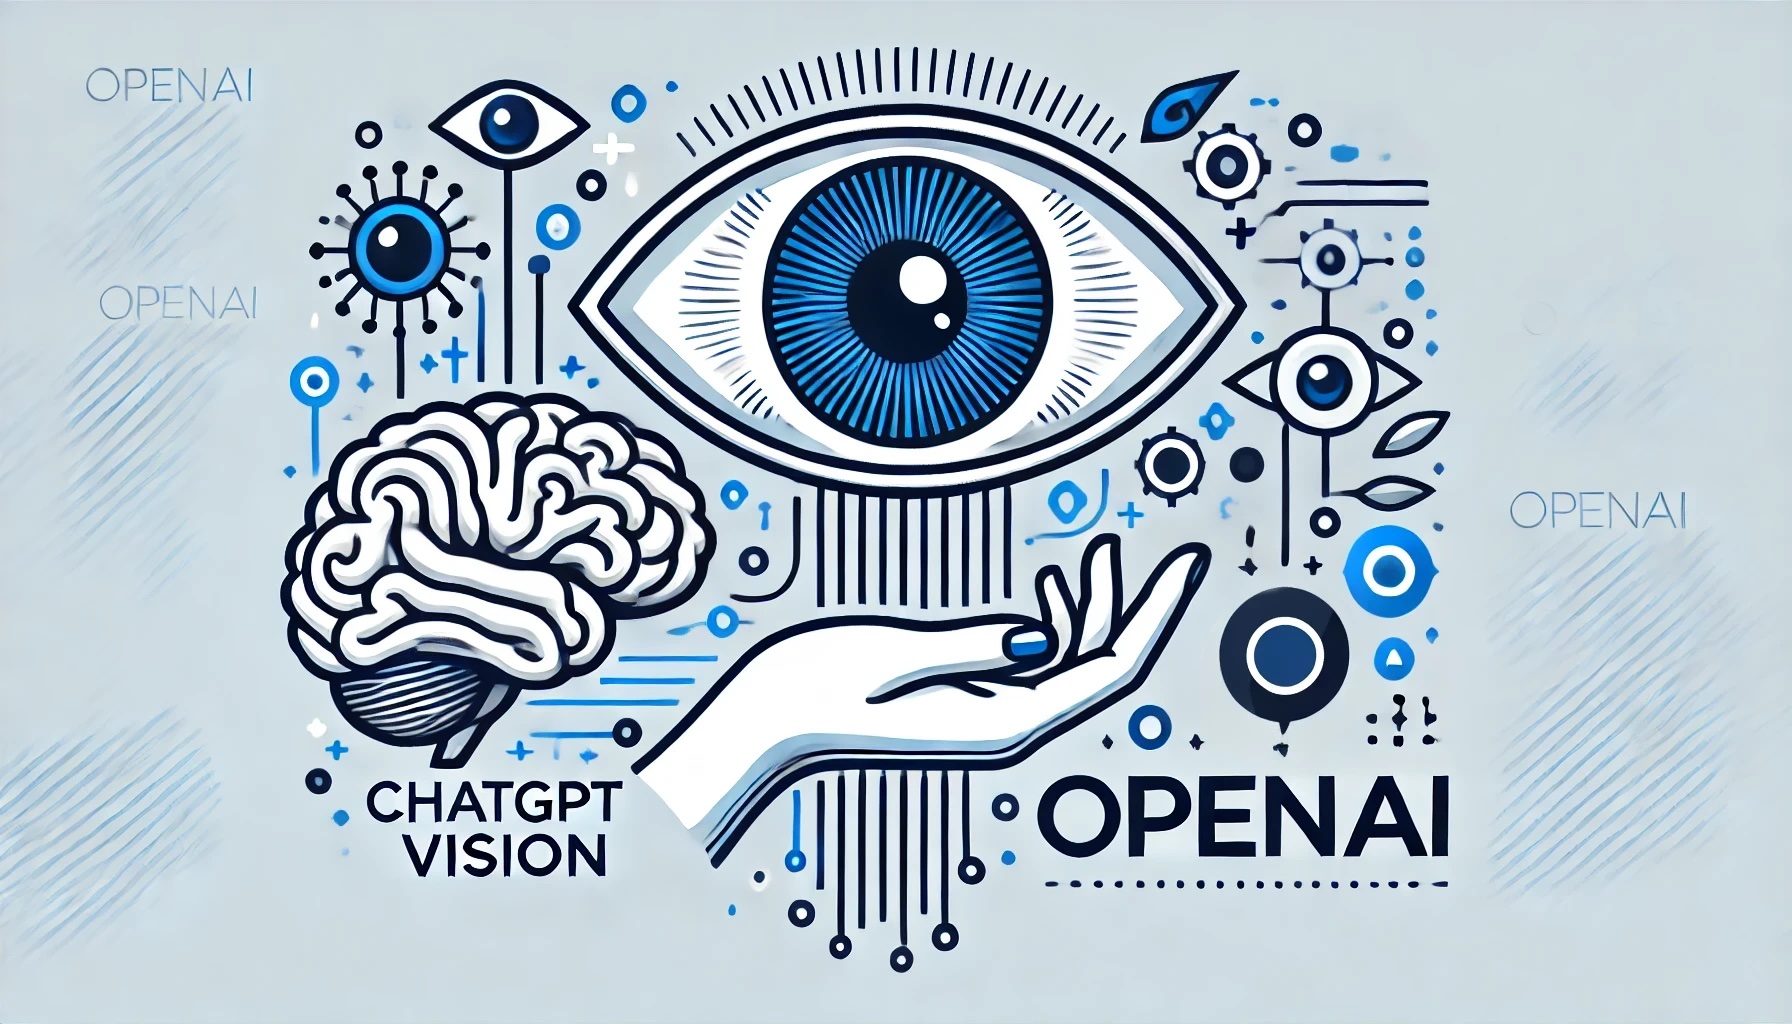 Modern graphic illustrating 'ChatGPT Vision' and OpenAI, featuring a stylized brain for AI and the OpenAI logo in a clean blue and white color scheme